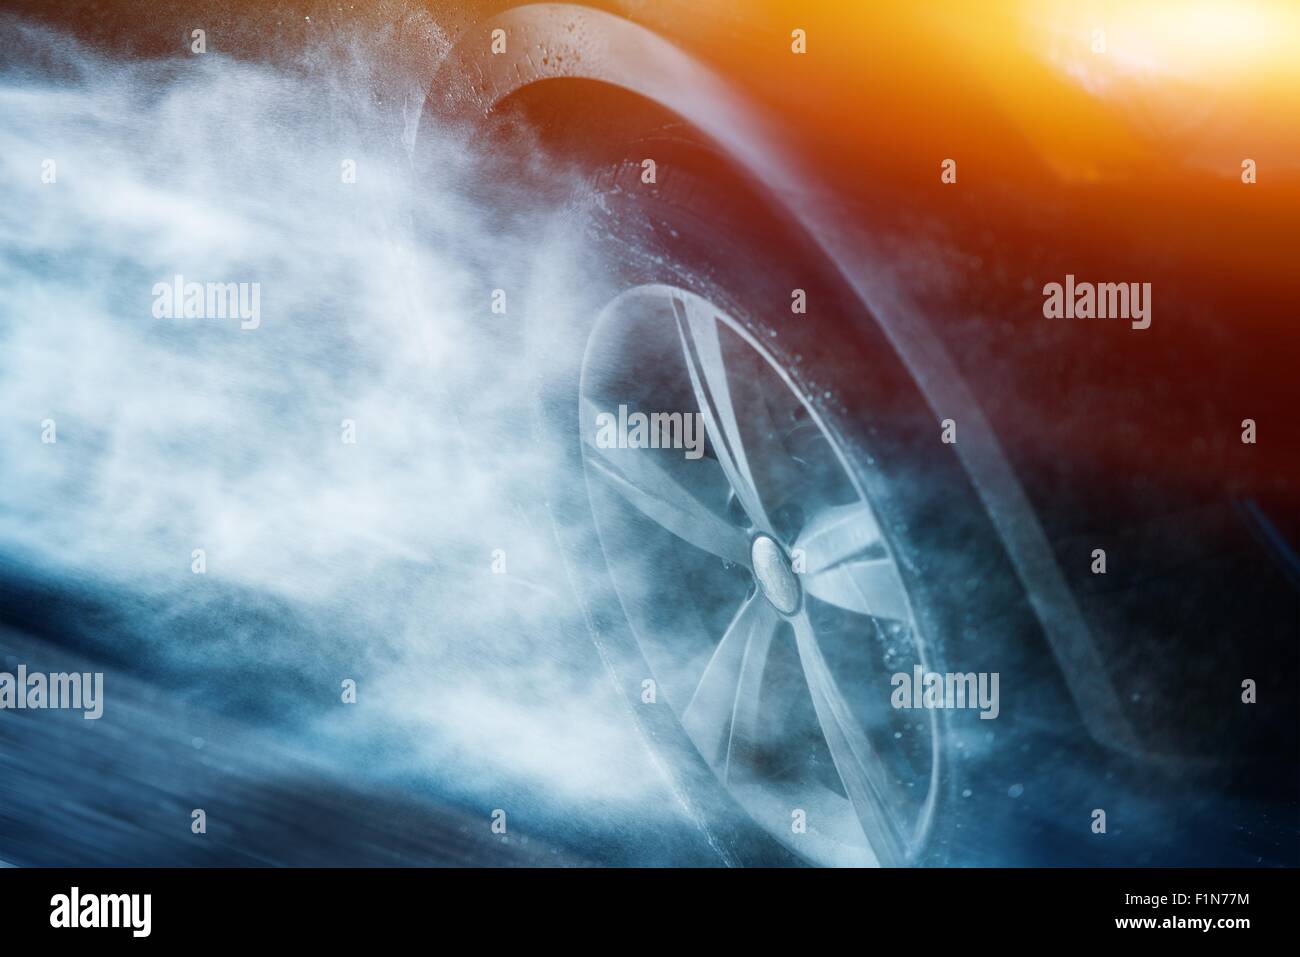 Heavy Rain Driving. Driving Aquaplaning or Hydroplaning Concept. Car Wheel in the Rainstorm. Stock Photo